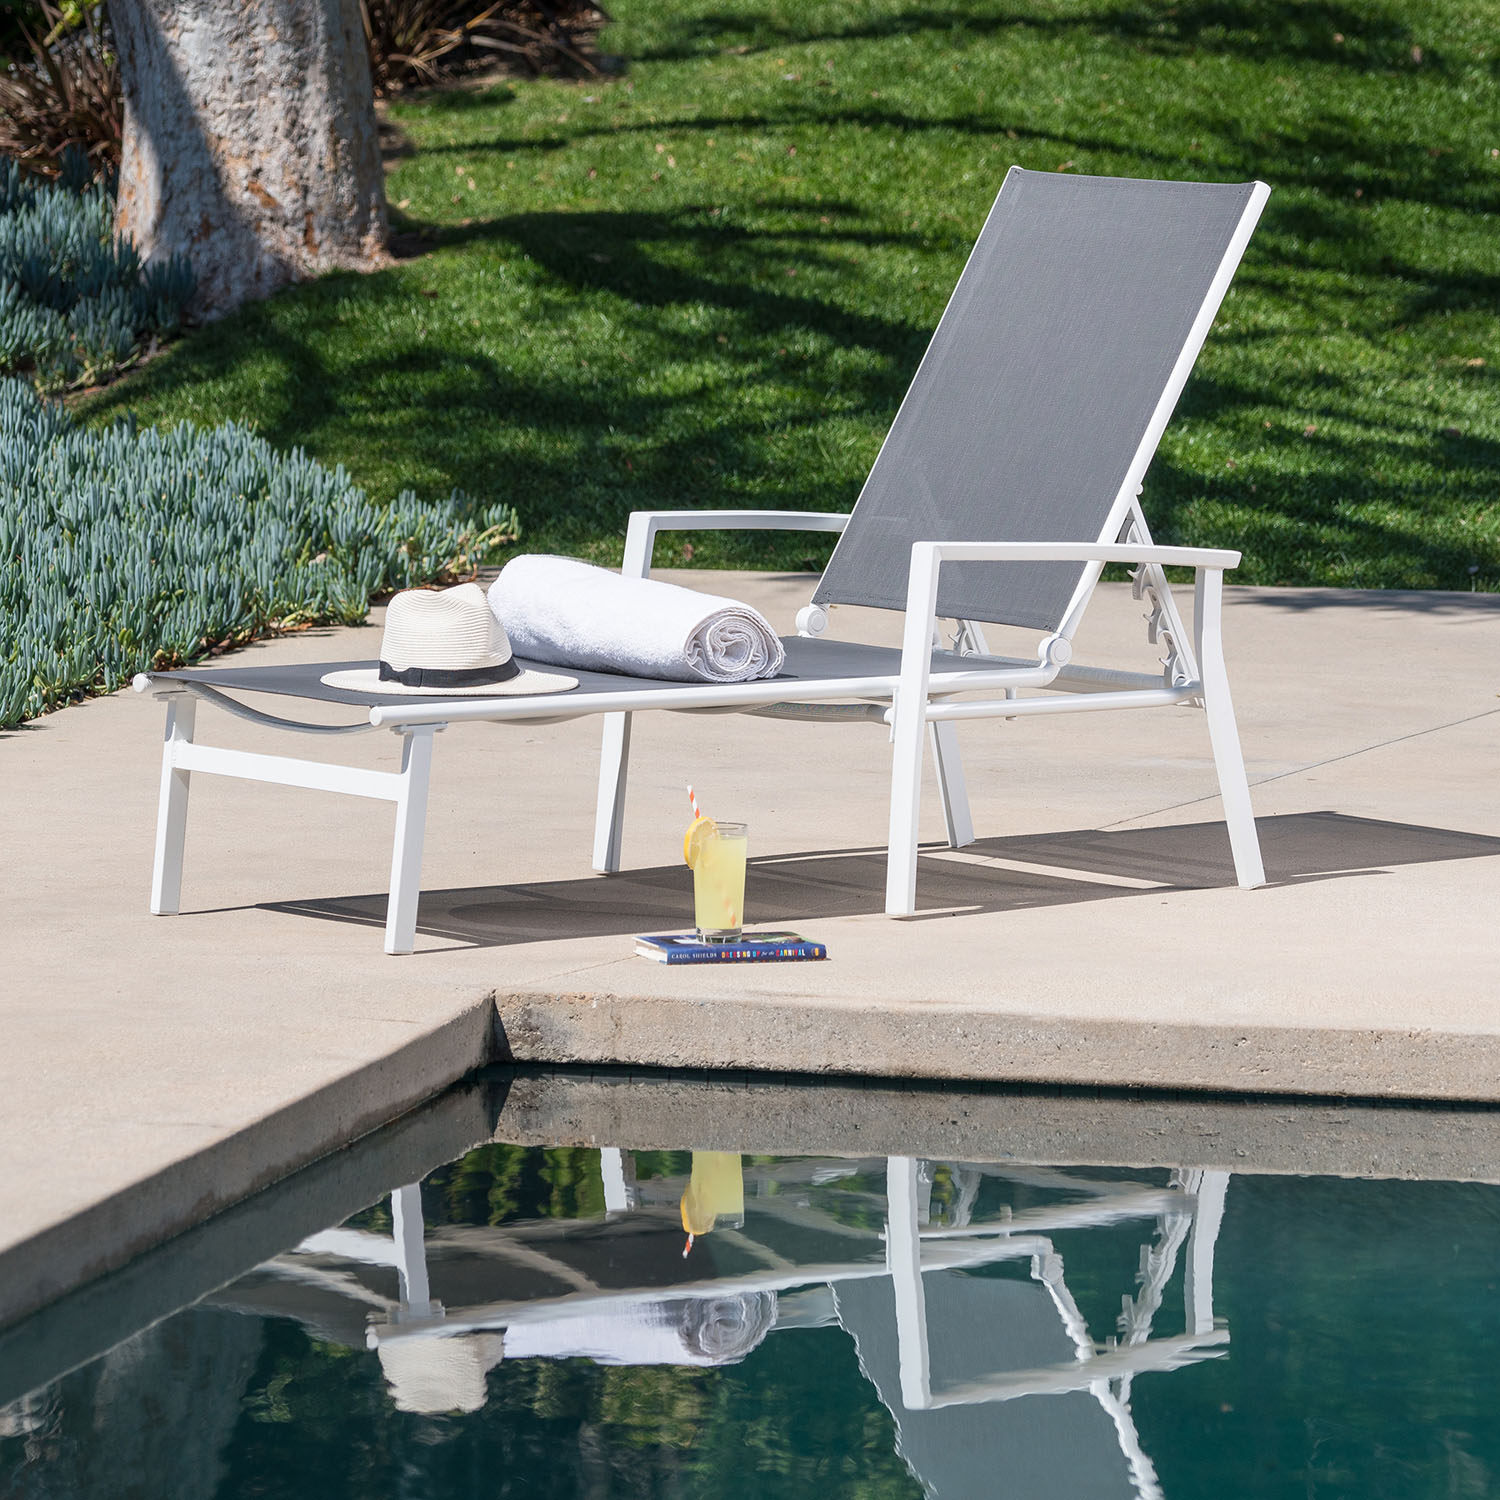 Hanover Naples 2x2 Sling Outdoor Folding Chaise Lounge Chair, Gray - image 1 of 19